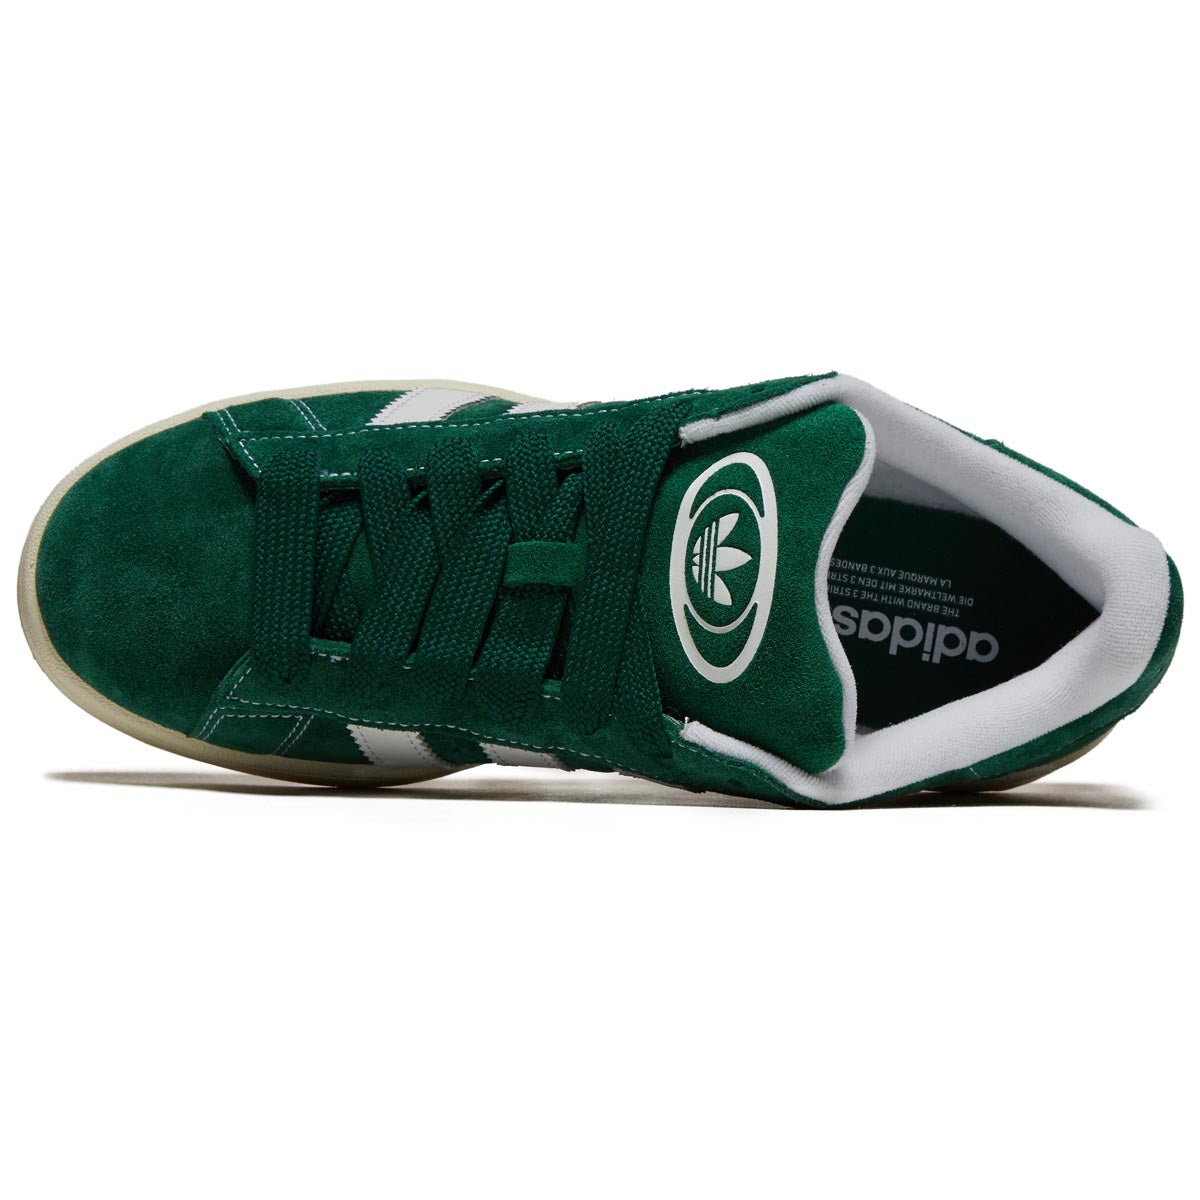 Adidas Campus 00s Shoes - Dark Green/Ftwr White/Off White image 3